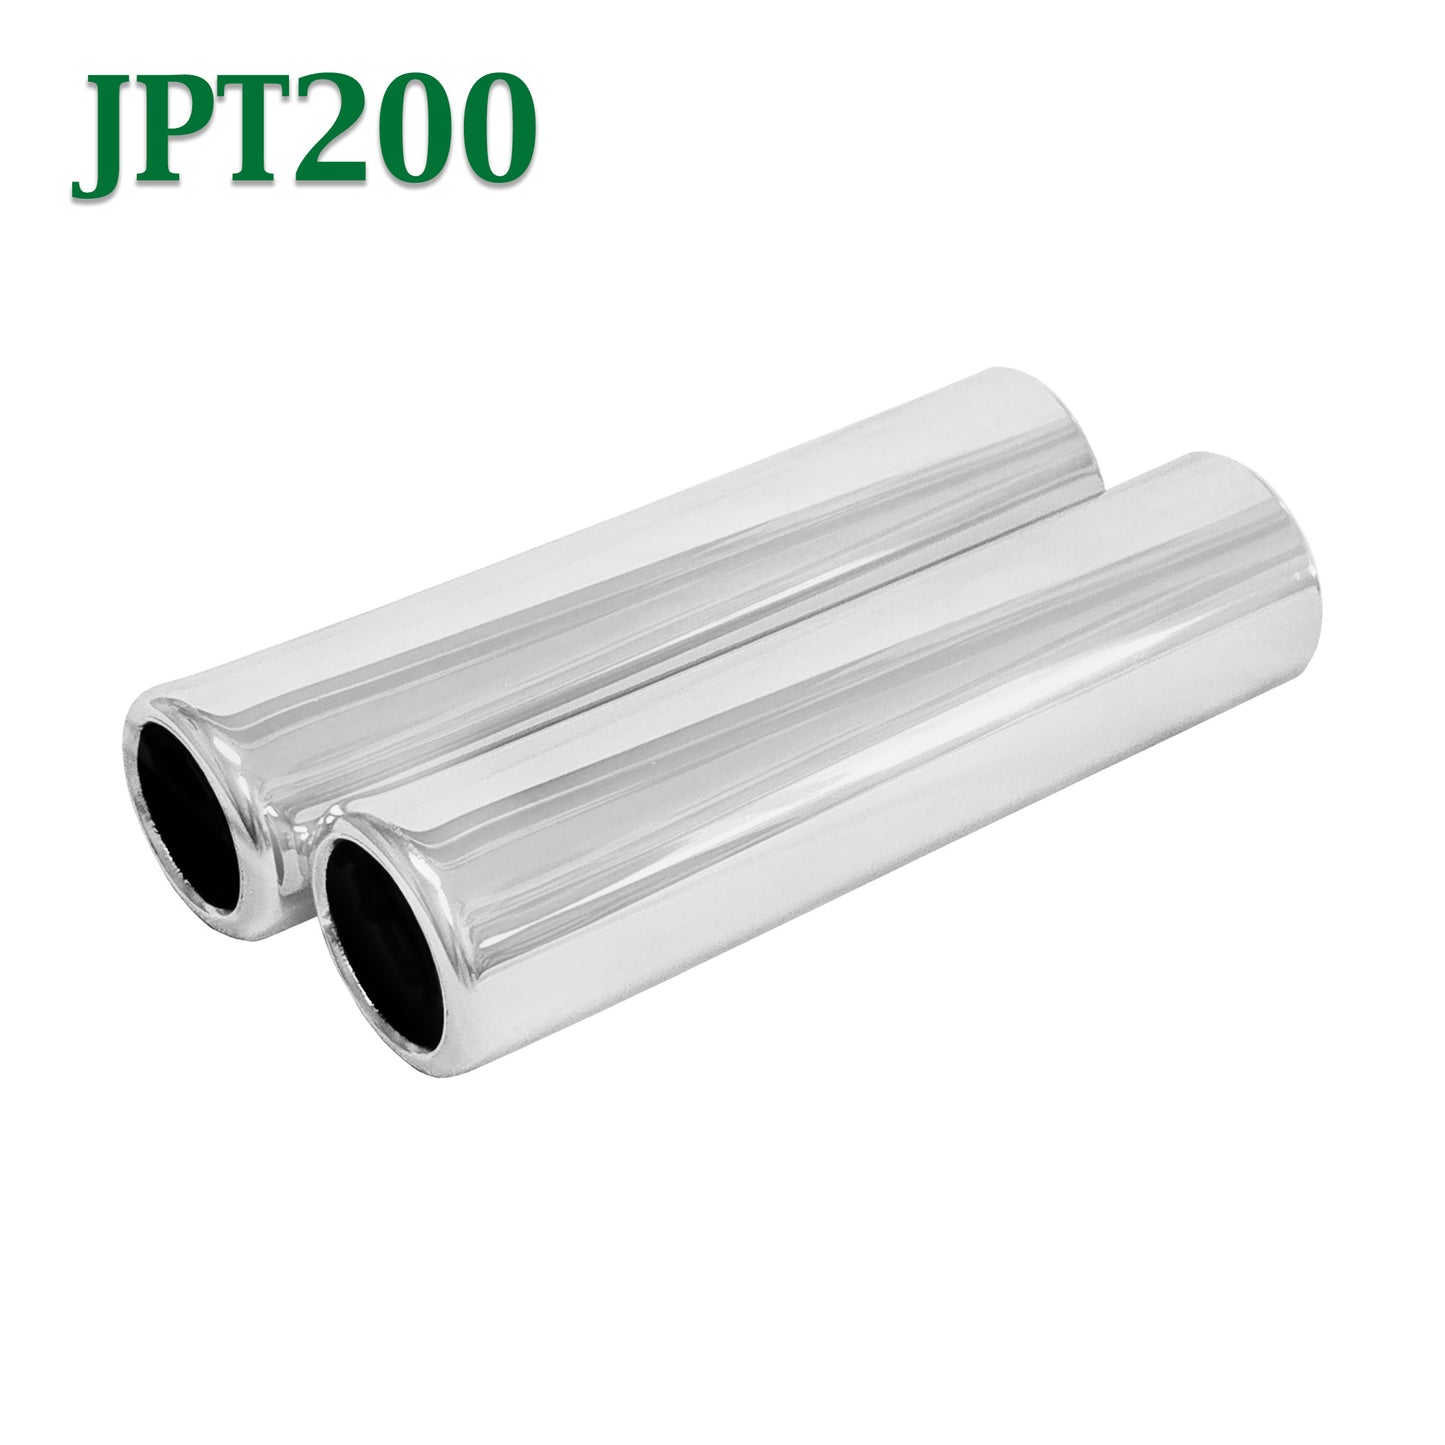 JPT200 2" Chrome Round Pencil Exhaust Tip 2 1/4" 2.25" Outlet / 9" Long